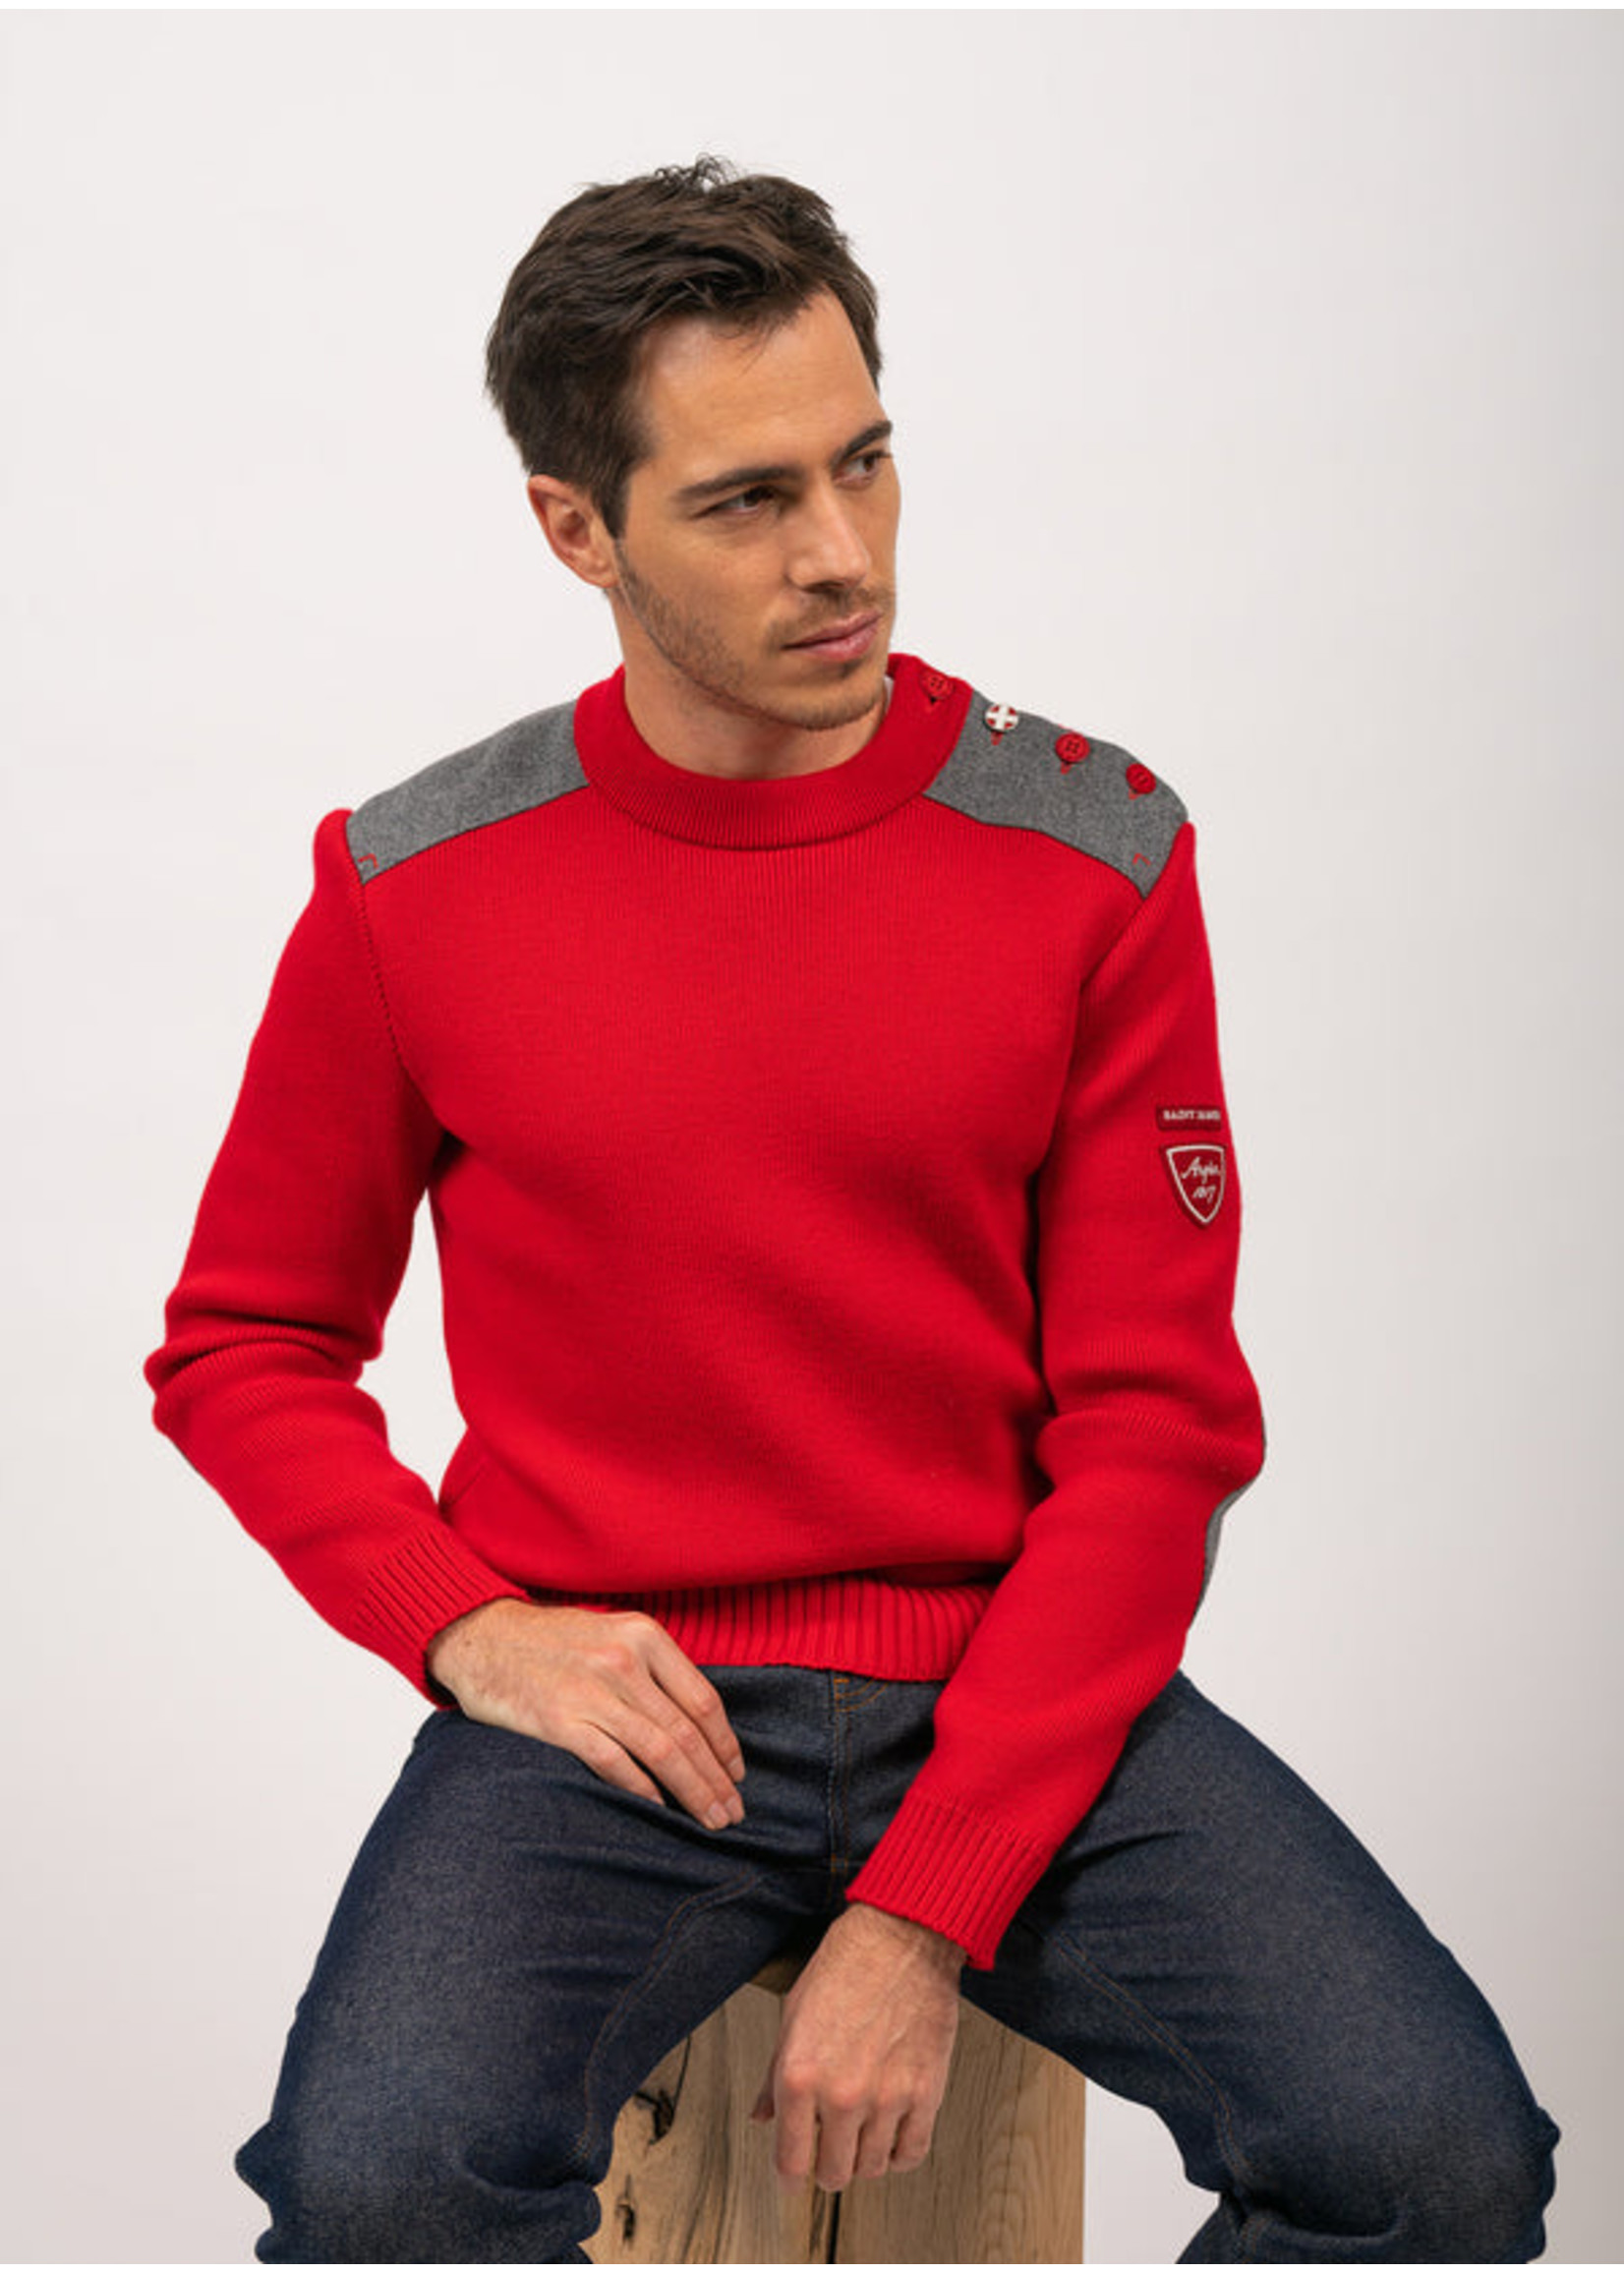 SAINT-JAMES MORAINE ARPIN Fisherman Sweater with Grey Elbow Patches